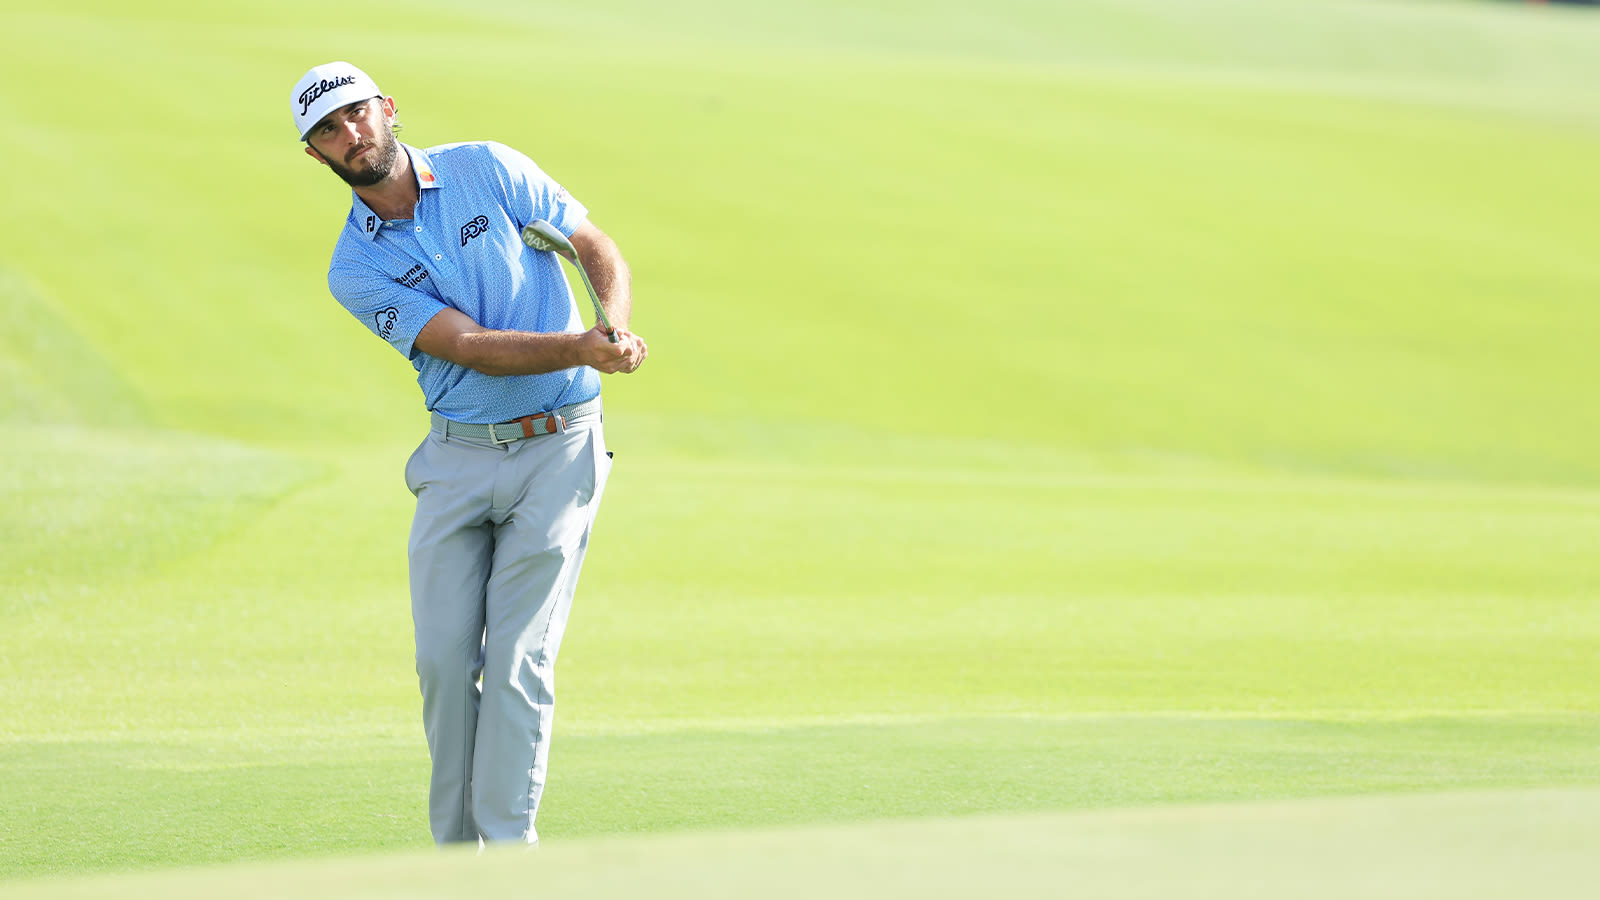 Max Homa chips onto the 16th hole during the second round of The American Express tournament on the Stadium course at PGA West on January 22, 2021 in La Quinta, California. (Photo by Harry How/Getty Images)